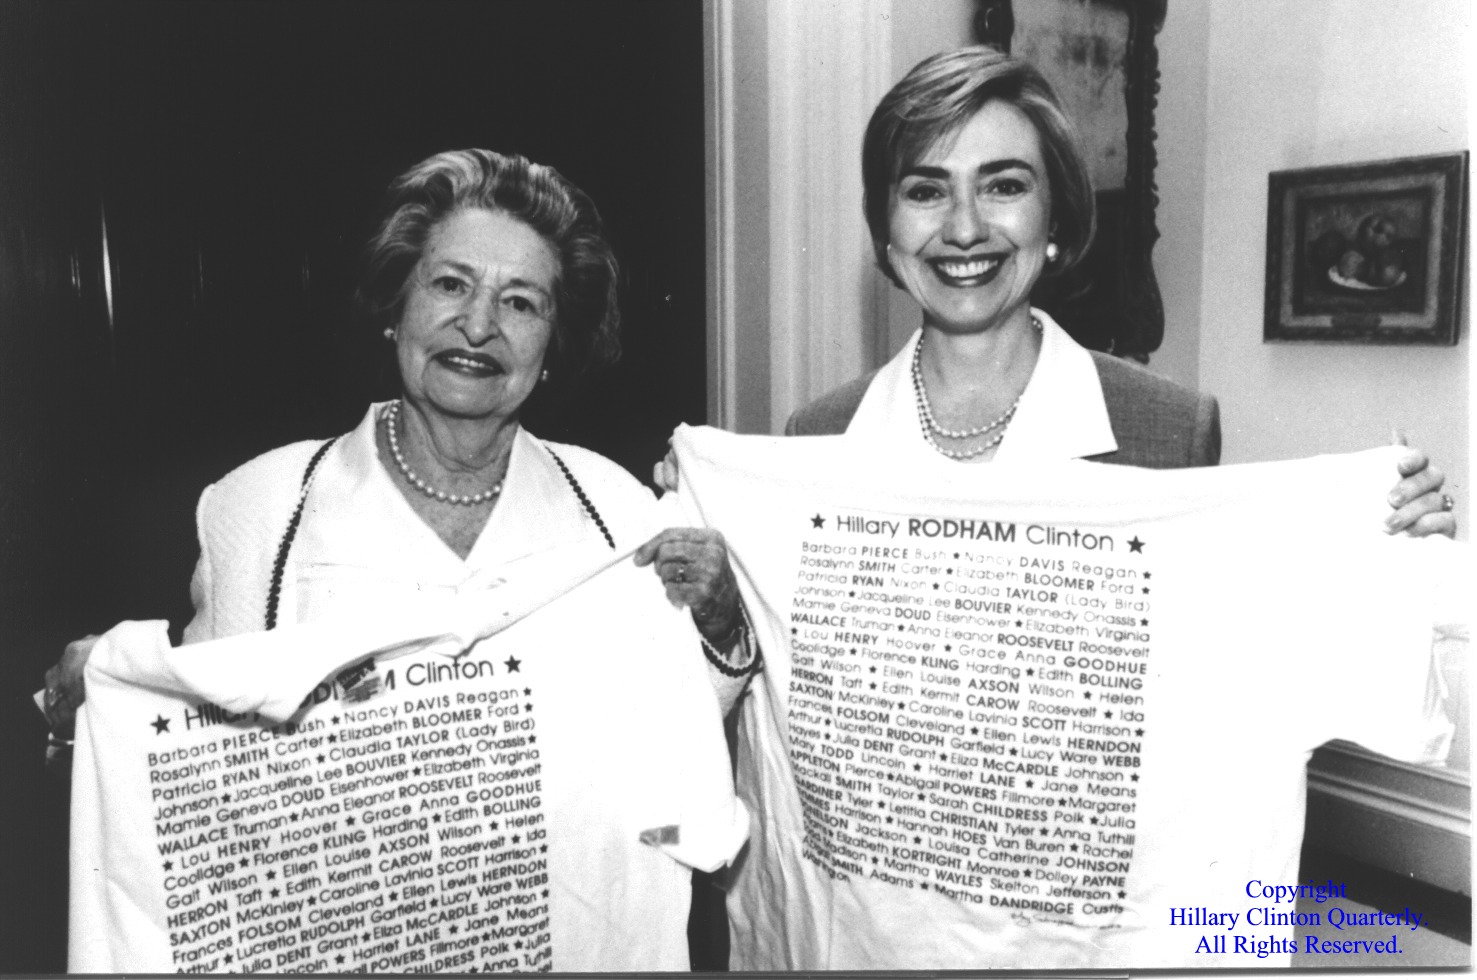 Lady Bird Johnson and Hillary Clinton holding up tee-shirts with the names of all the First Ladies, 1994.